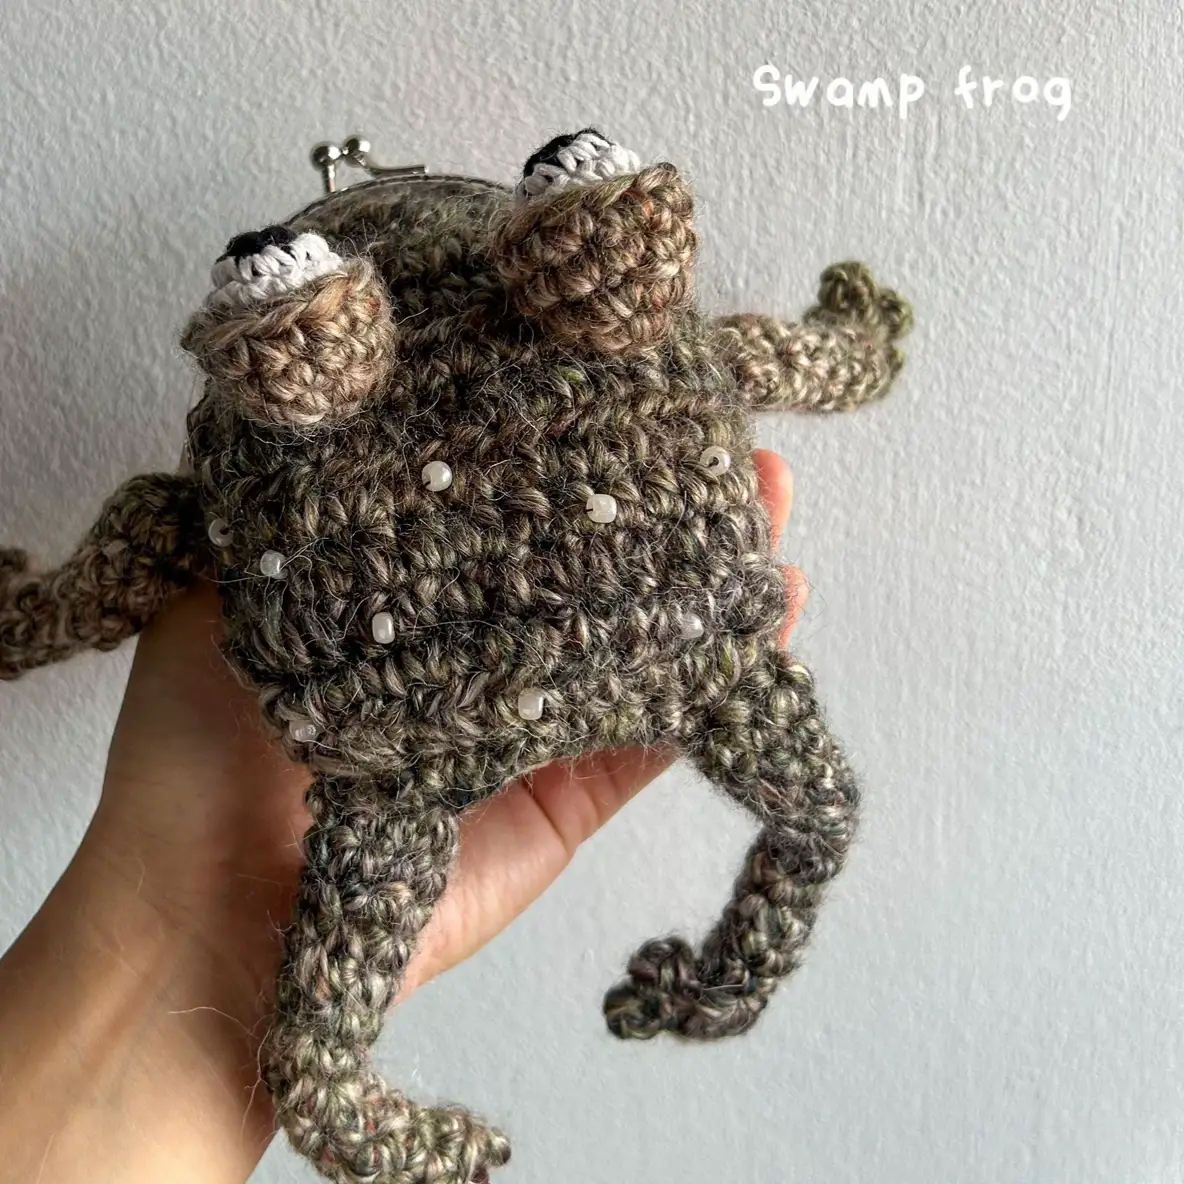 Have you SEEN these REALISTIC frog pouches?!, Gallery posted by w4ntonmee